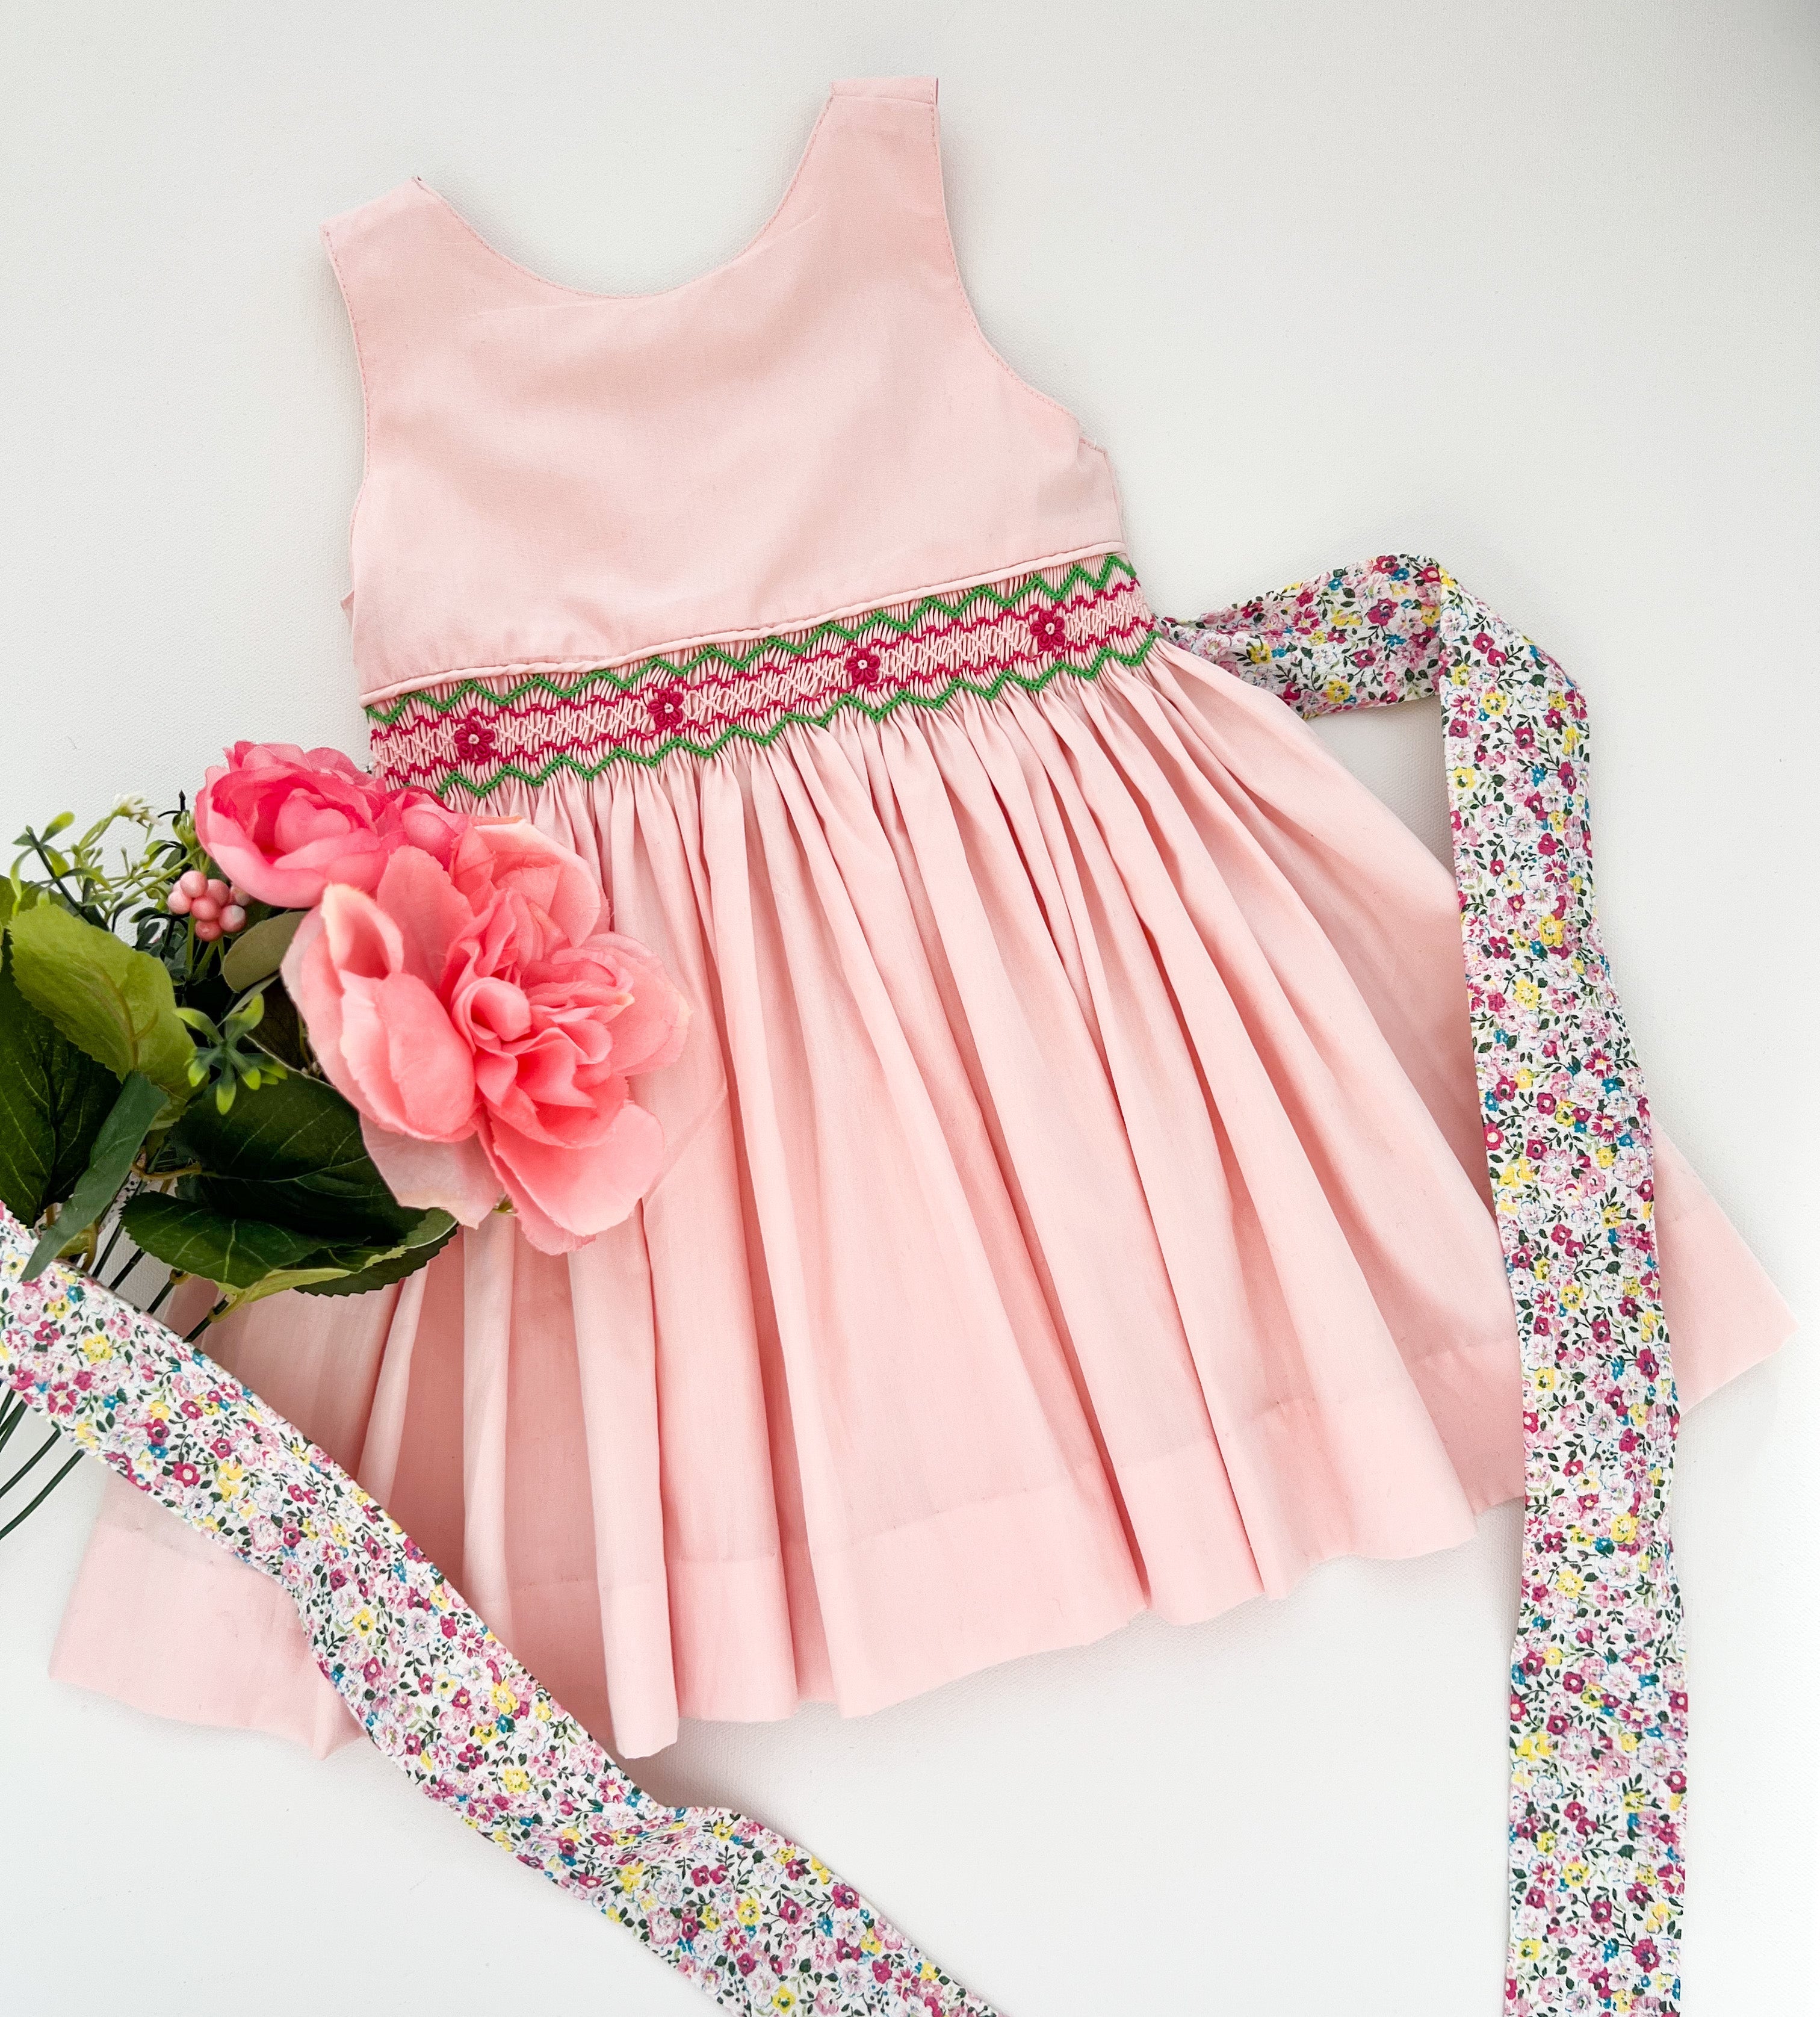 ** SECONDS SALE** The hand smocked ARIAL dress - In pink/liberty